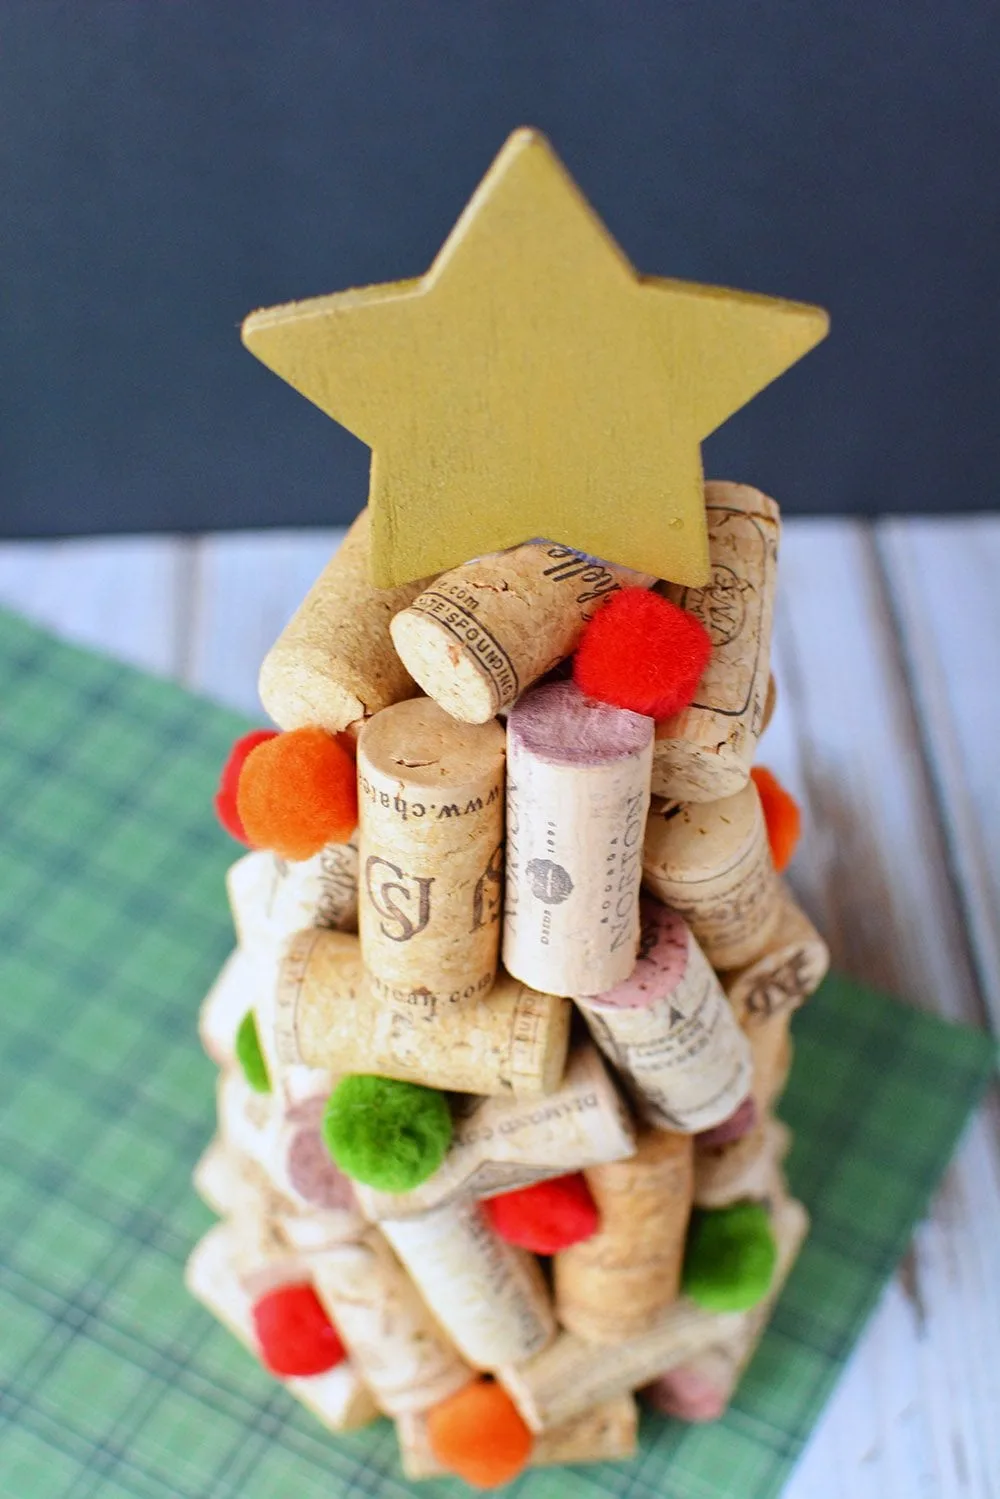 Christmas tree made out of wine corks with a wood star on top.